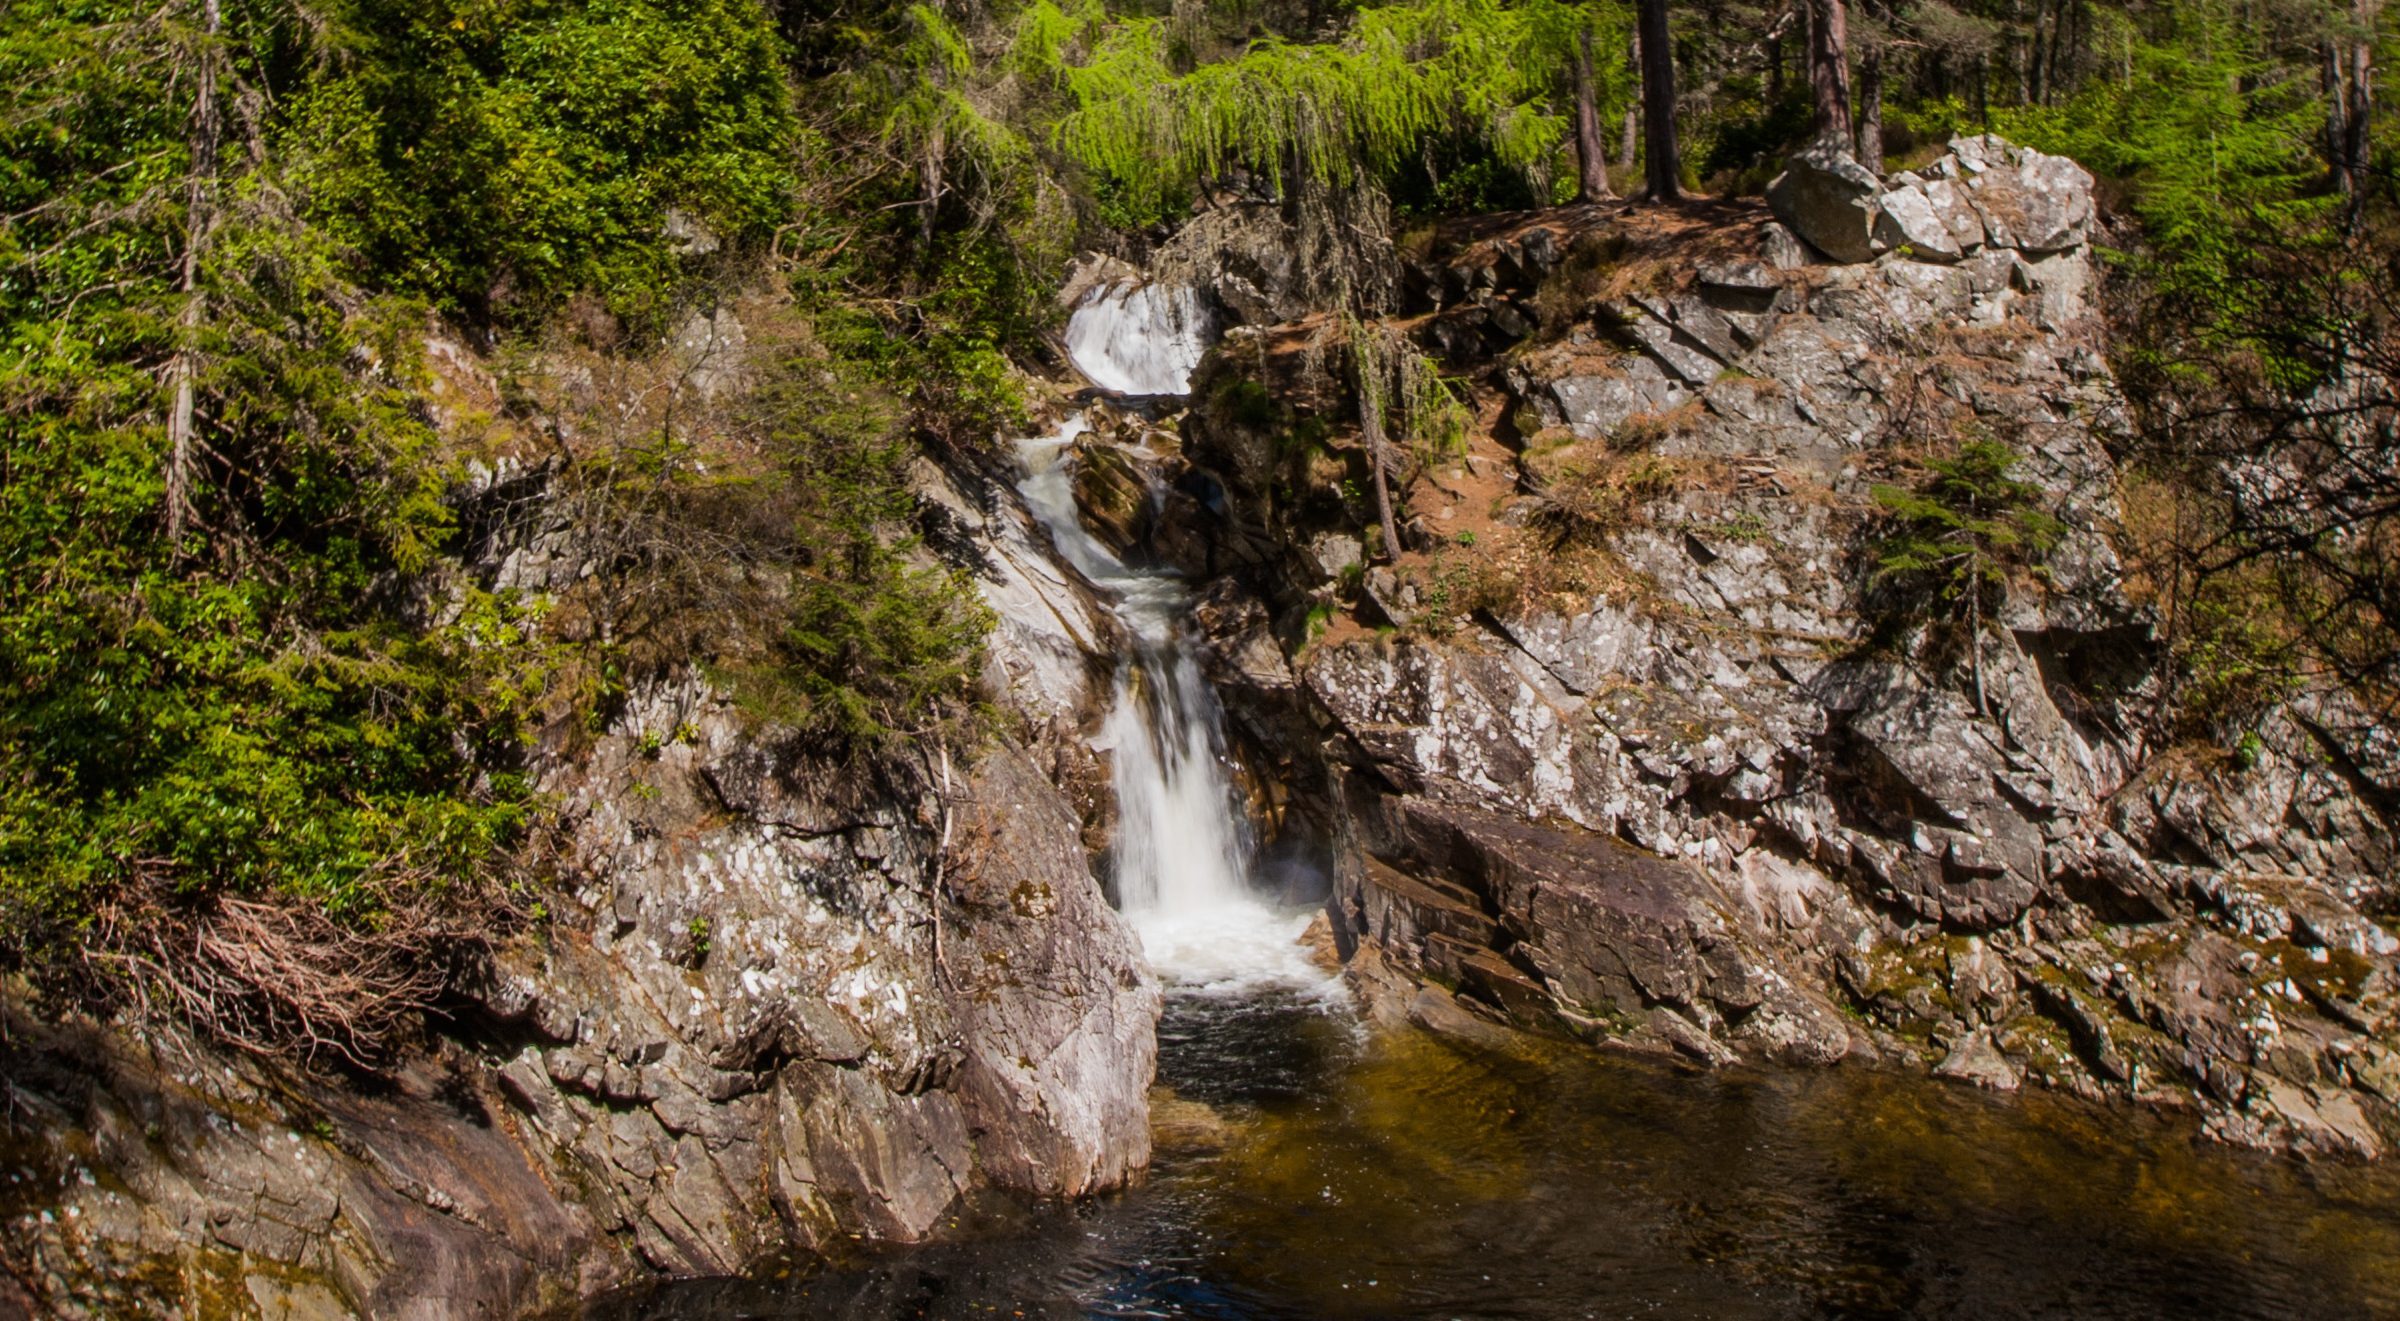 A section of the Falls of Bruar.